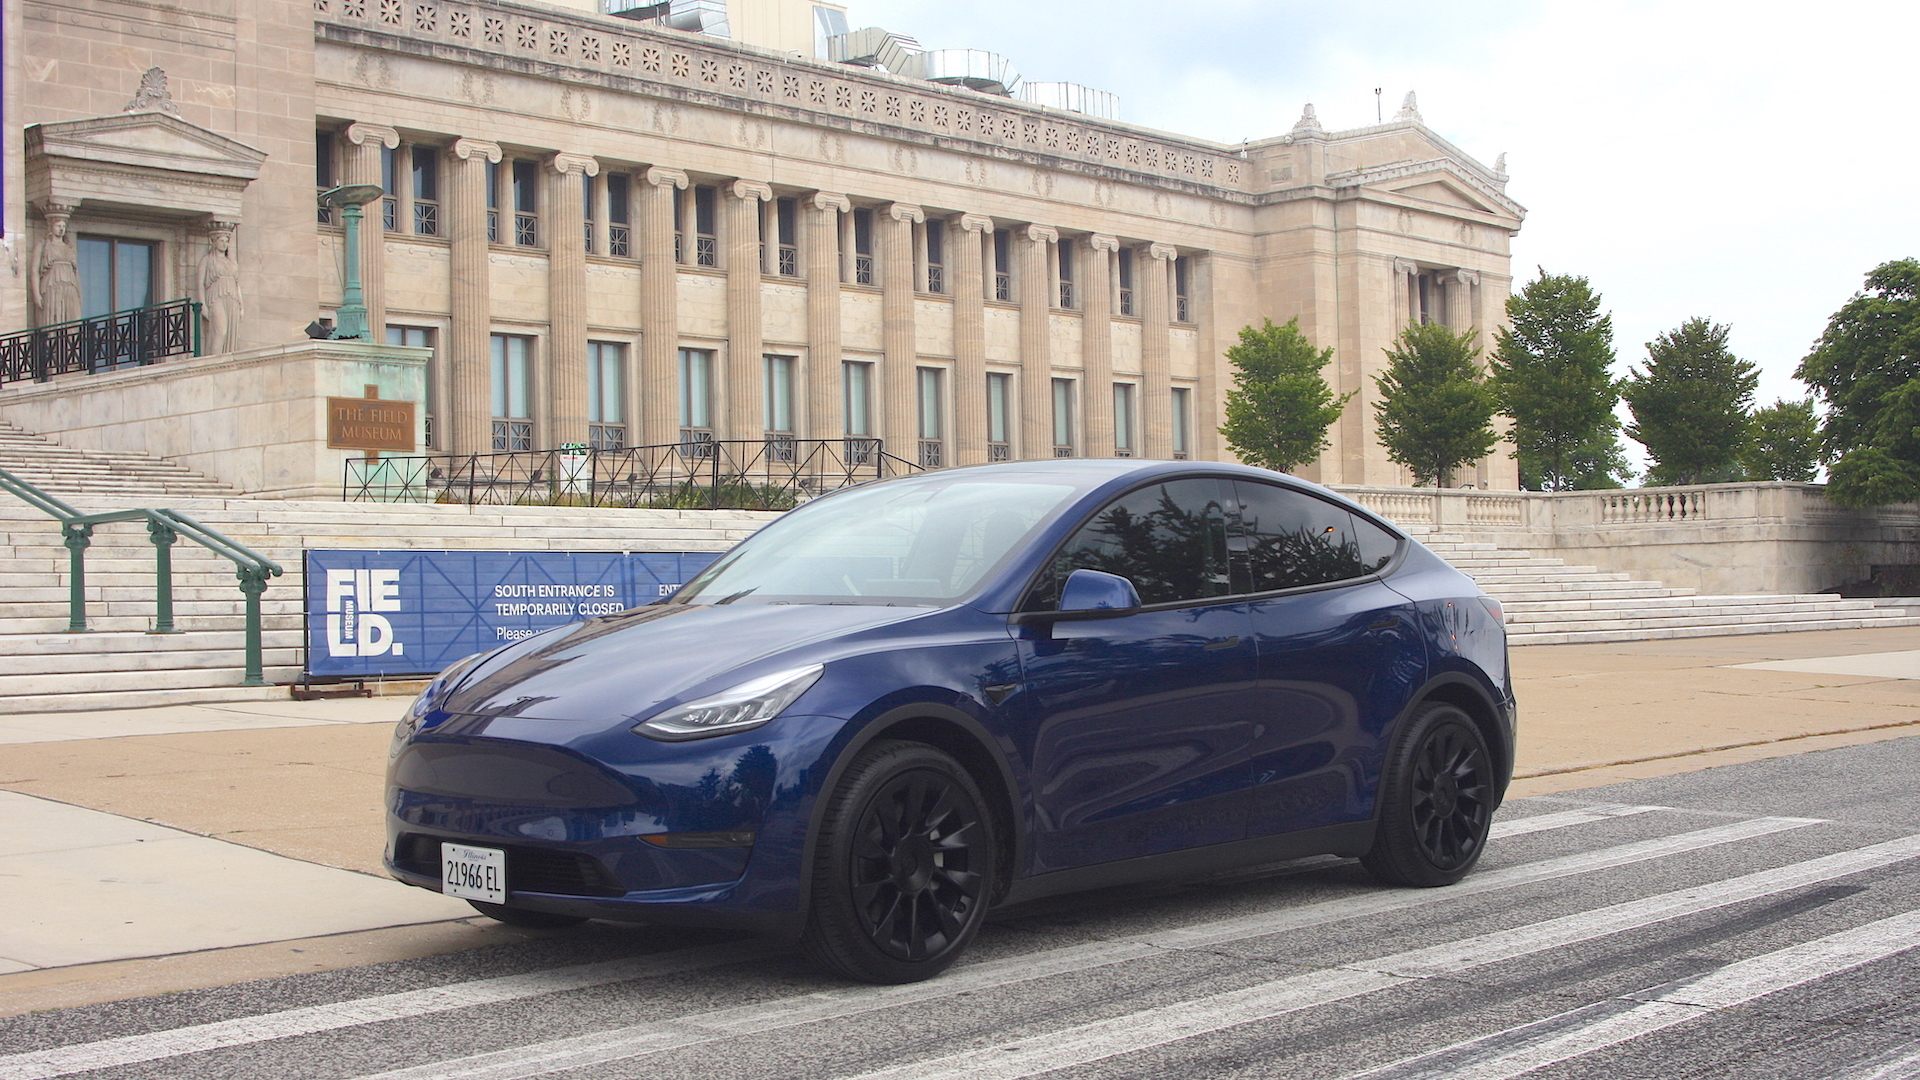 First drive review: 2020 Tesla Model Y sets the benchmark for